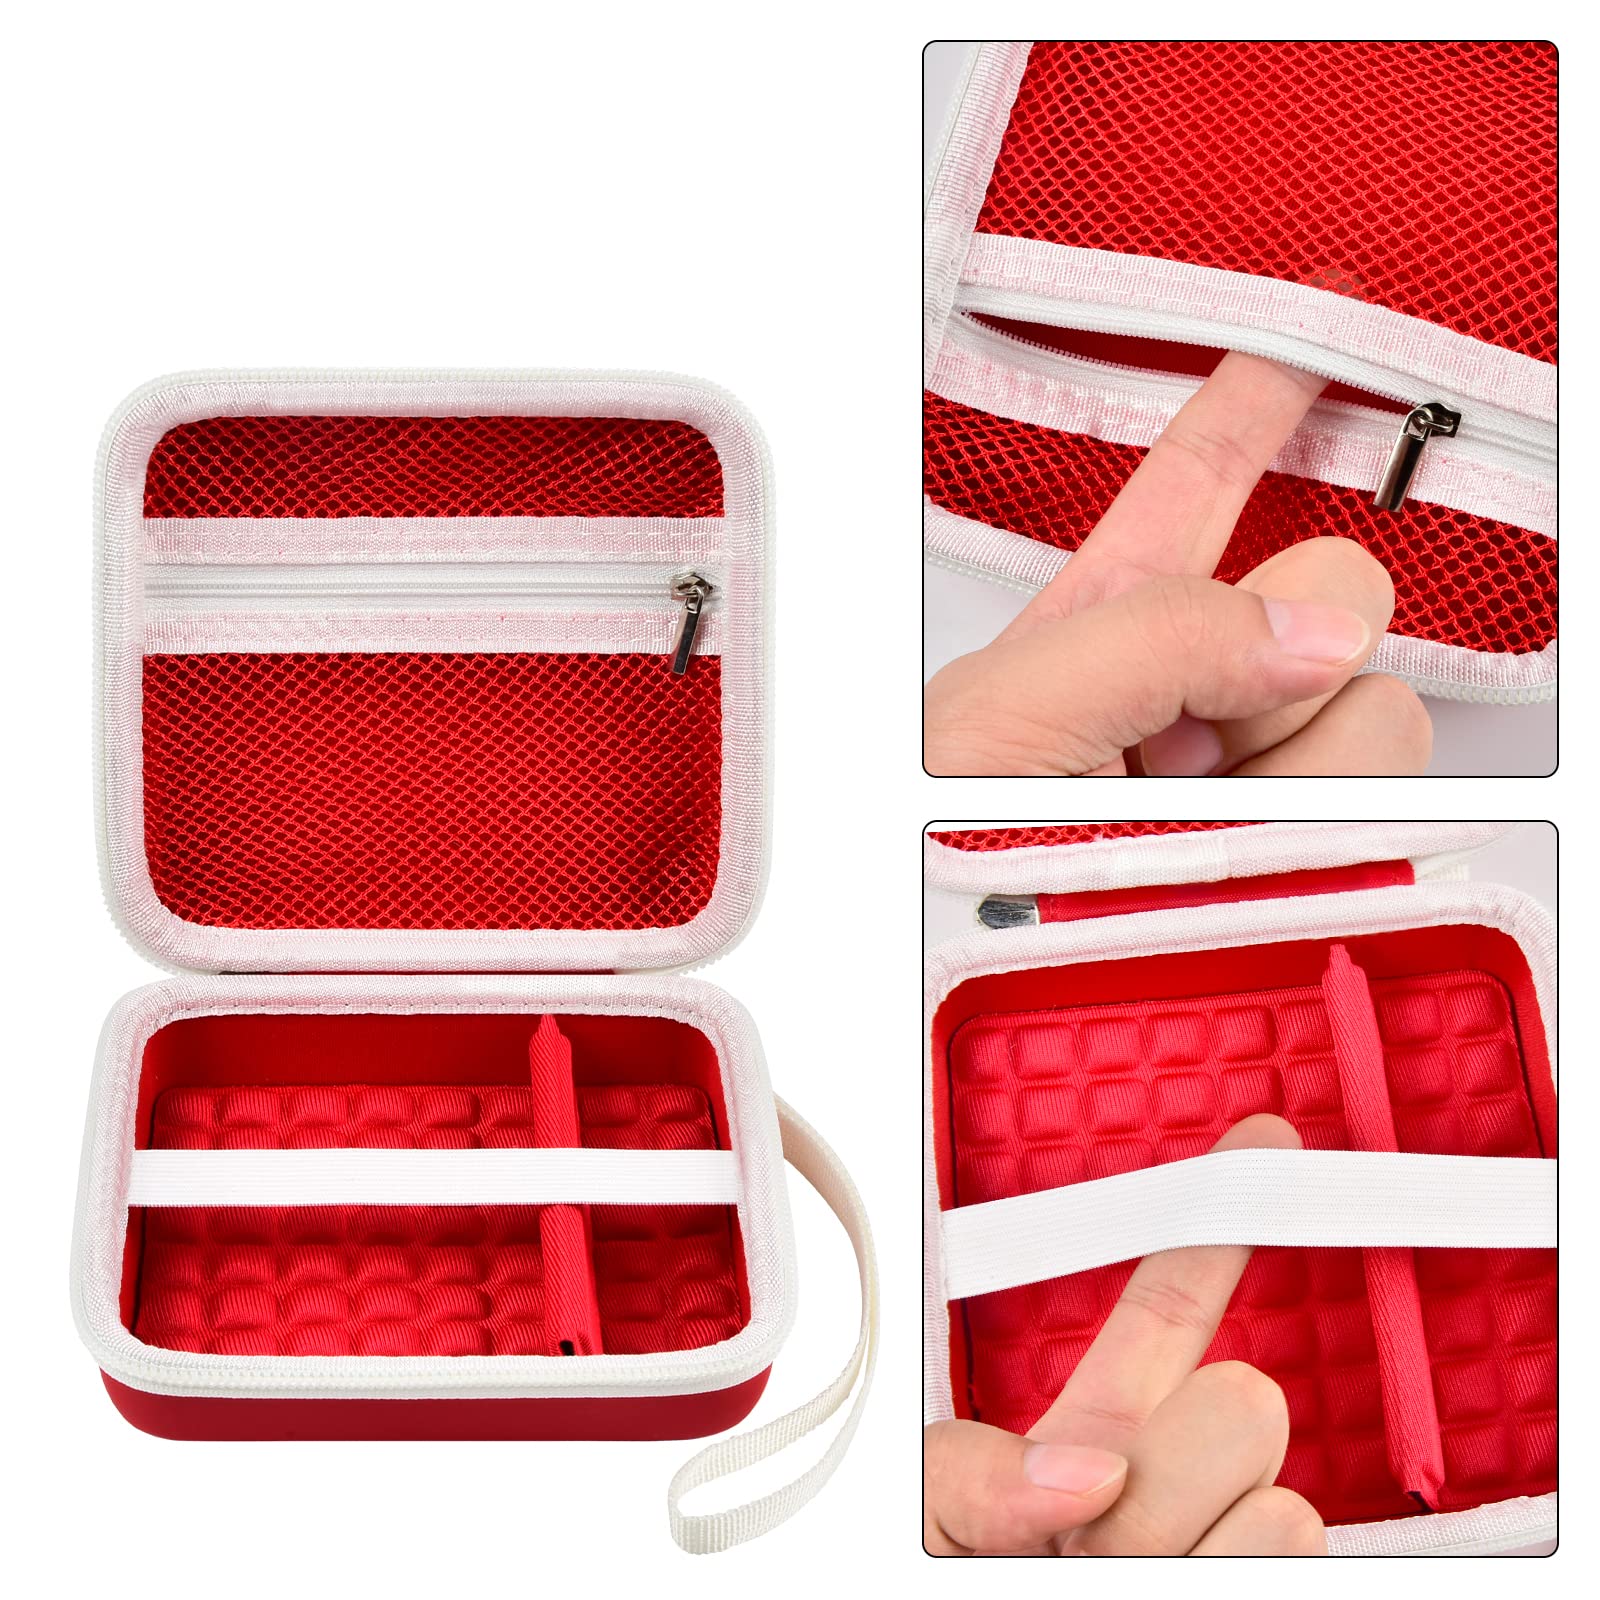 Kid Toy Camera Case for VTech Kidizoom Creator Cam Video Camera, Hard Travel Carrying Storage with Accessories Pocket - Red